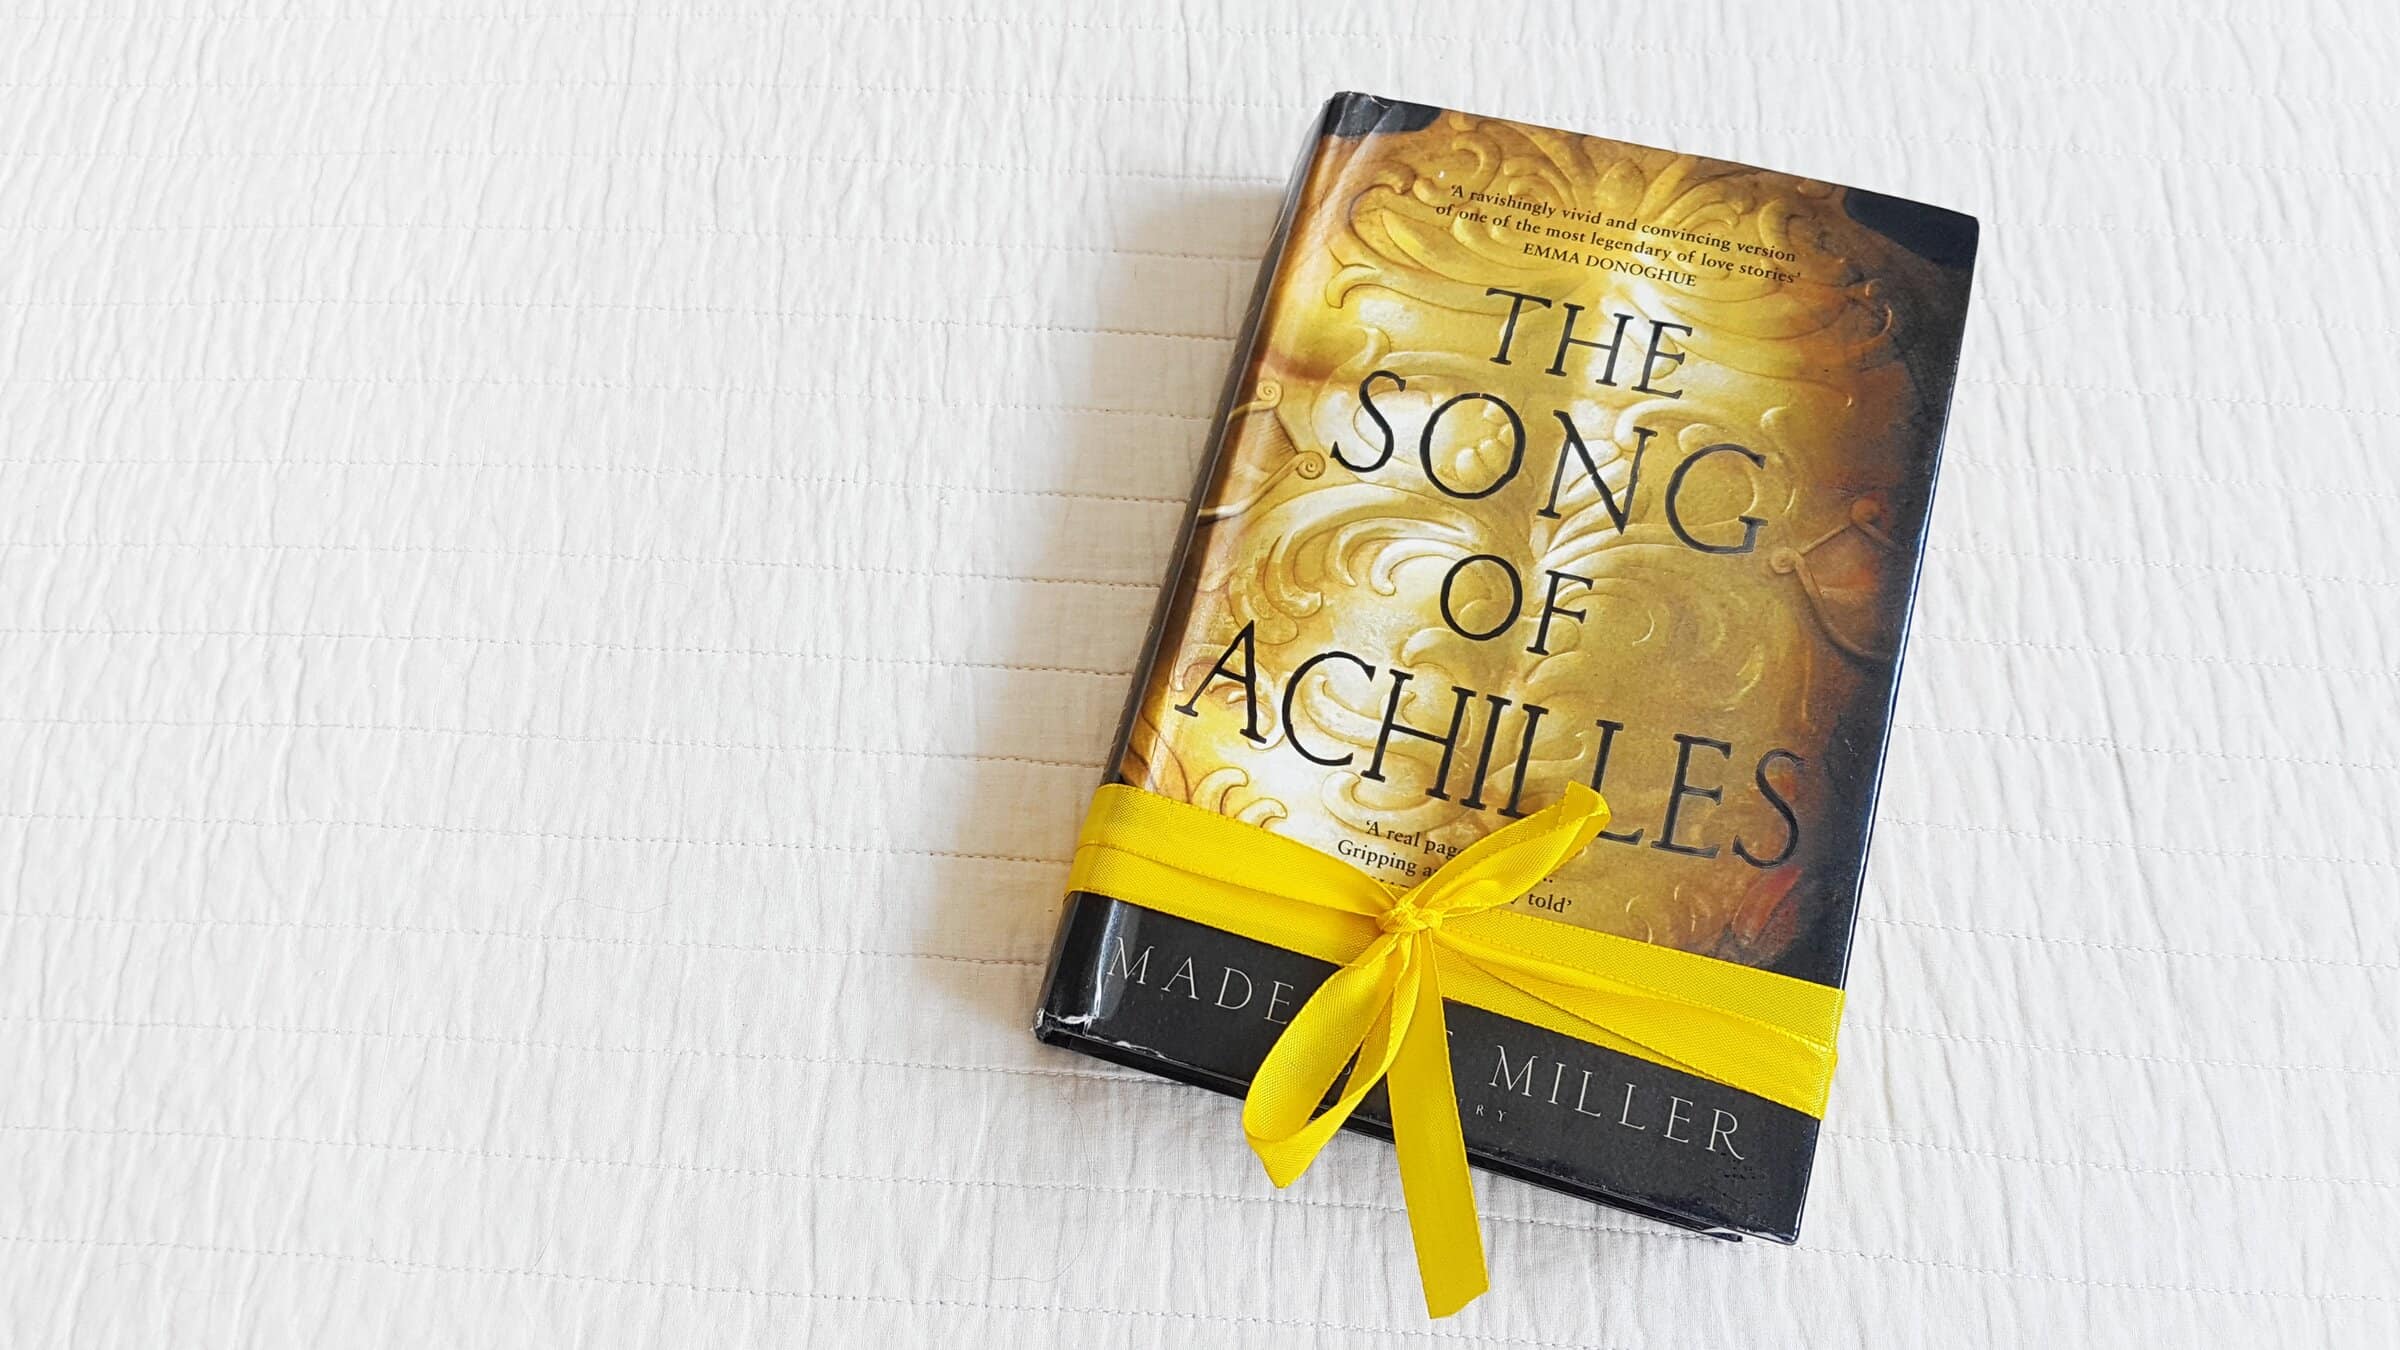 He gives books to us. The Song of Achilles книга.